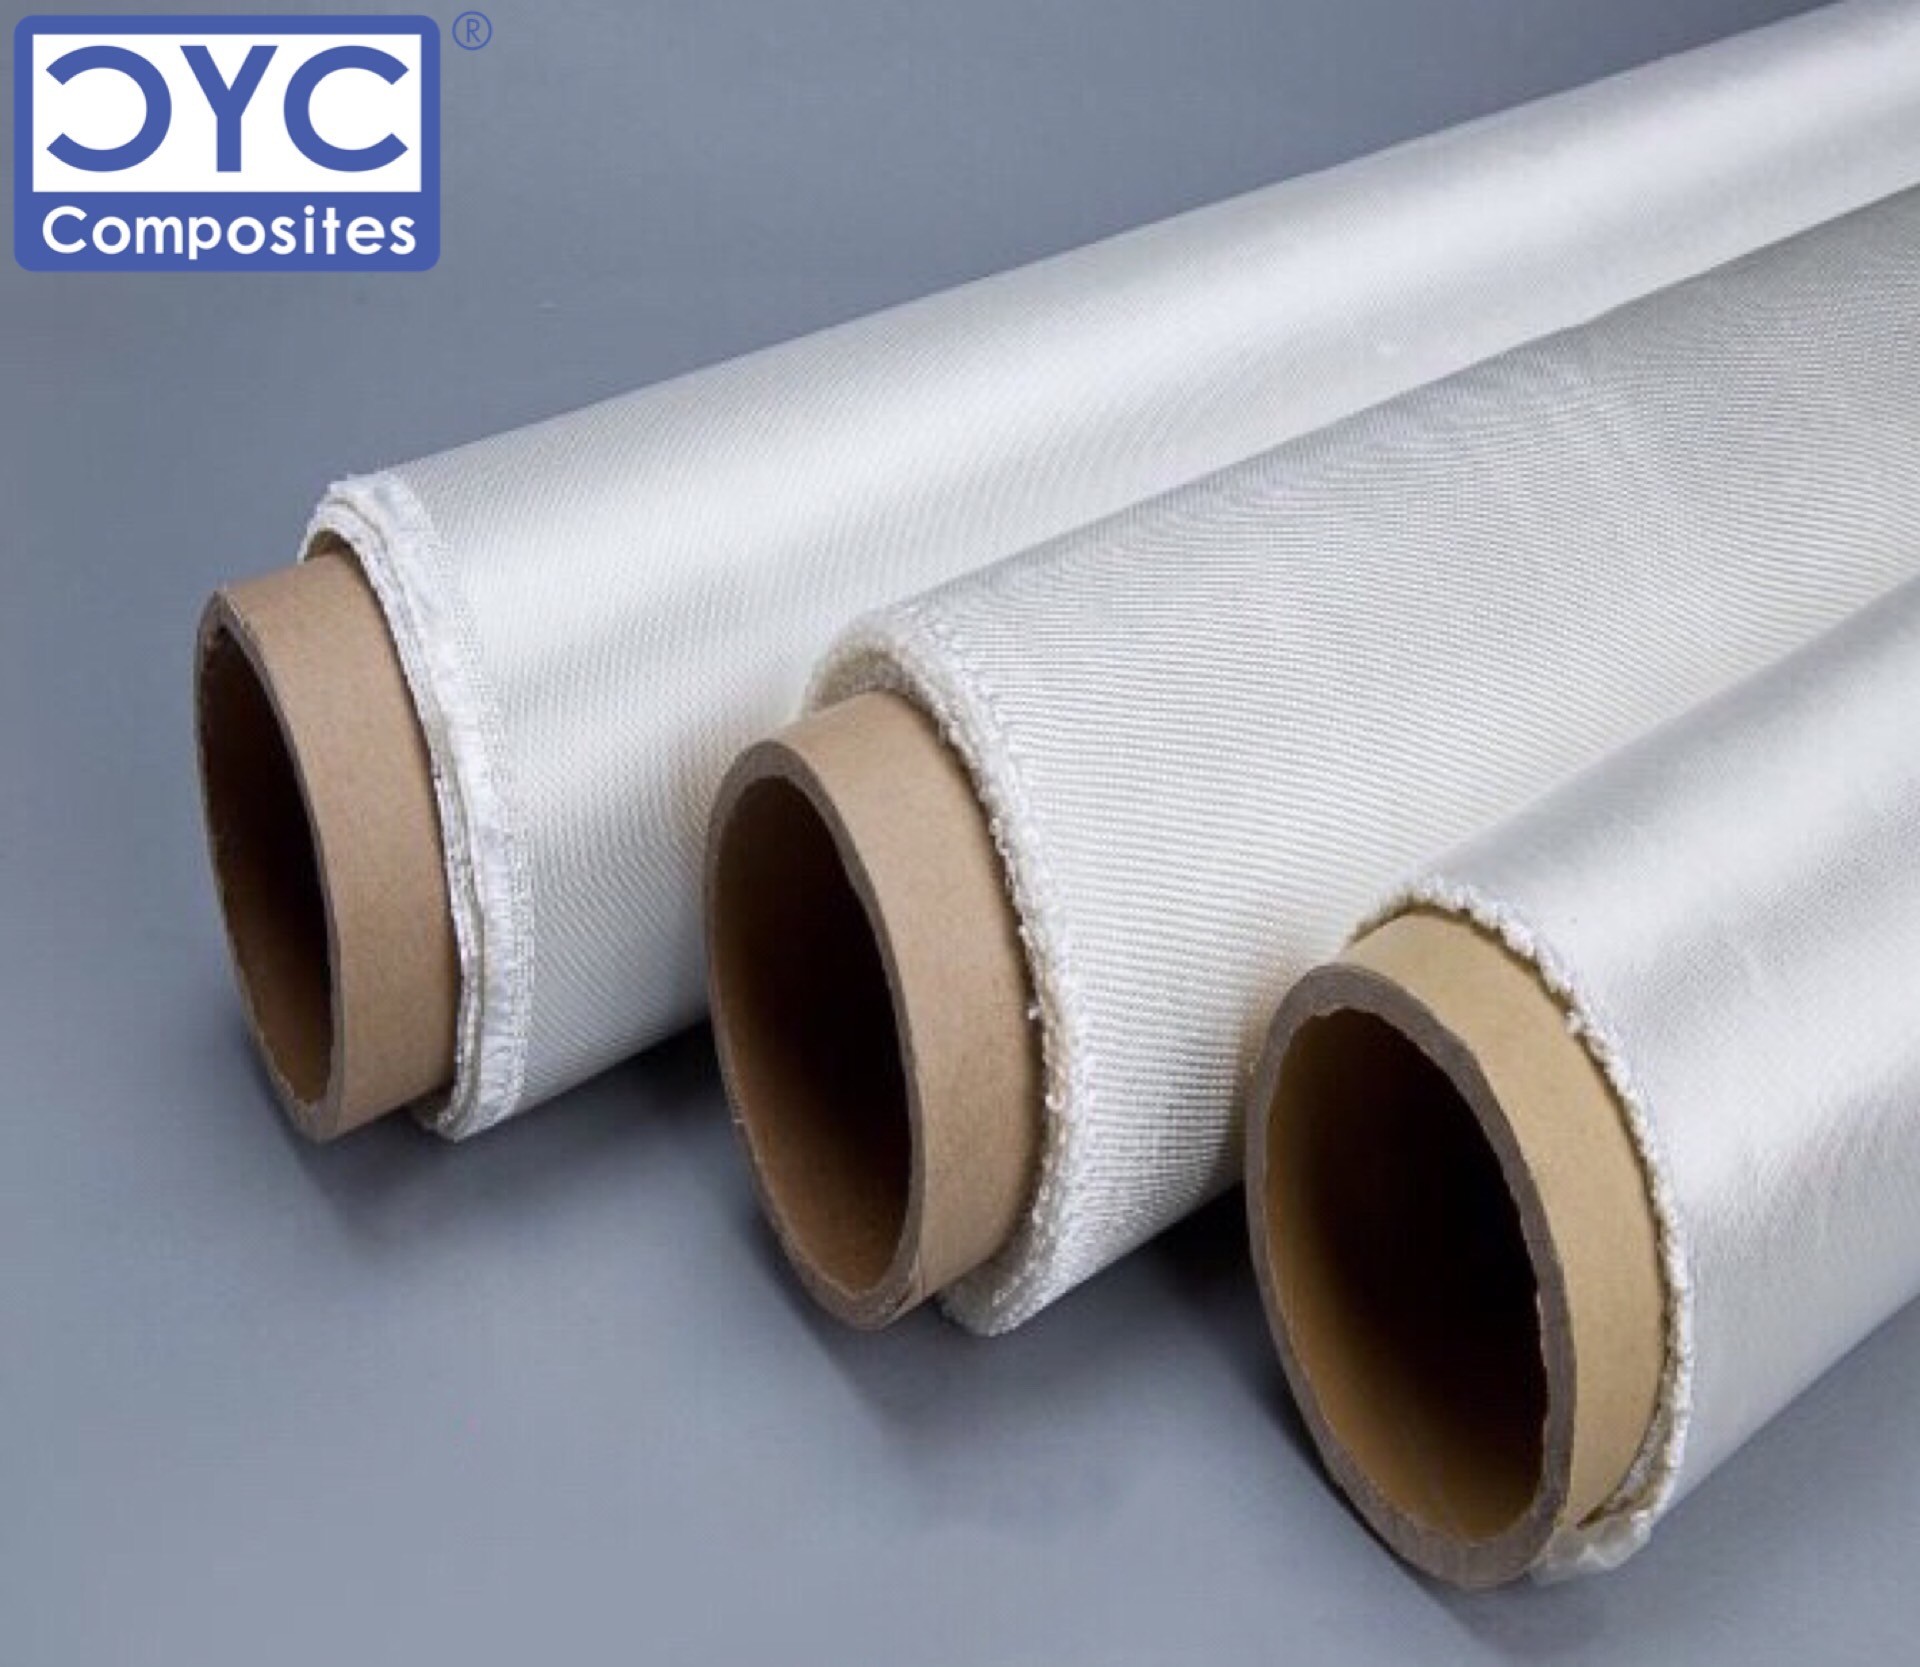 China CYC High Silica Fiberglass Fabric for High Temperature Resistant and Heat